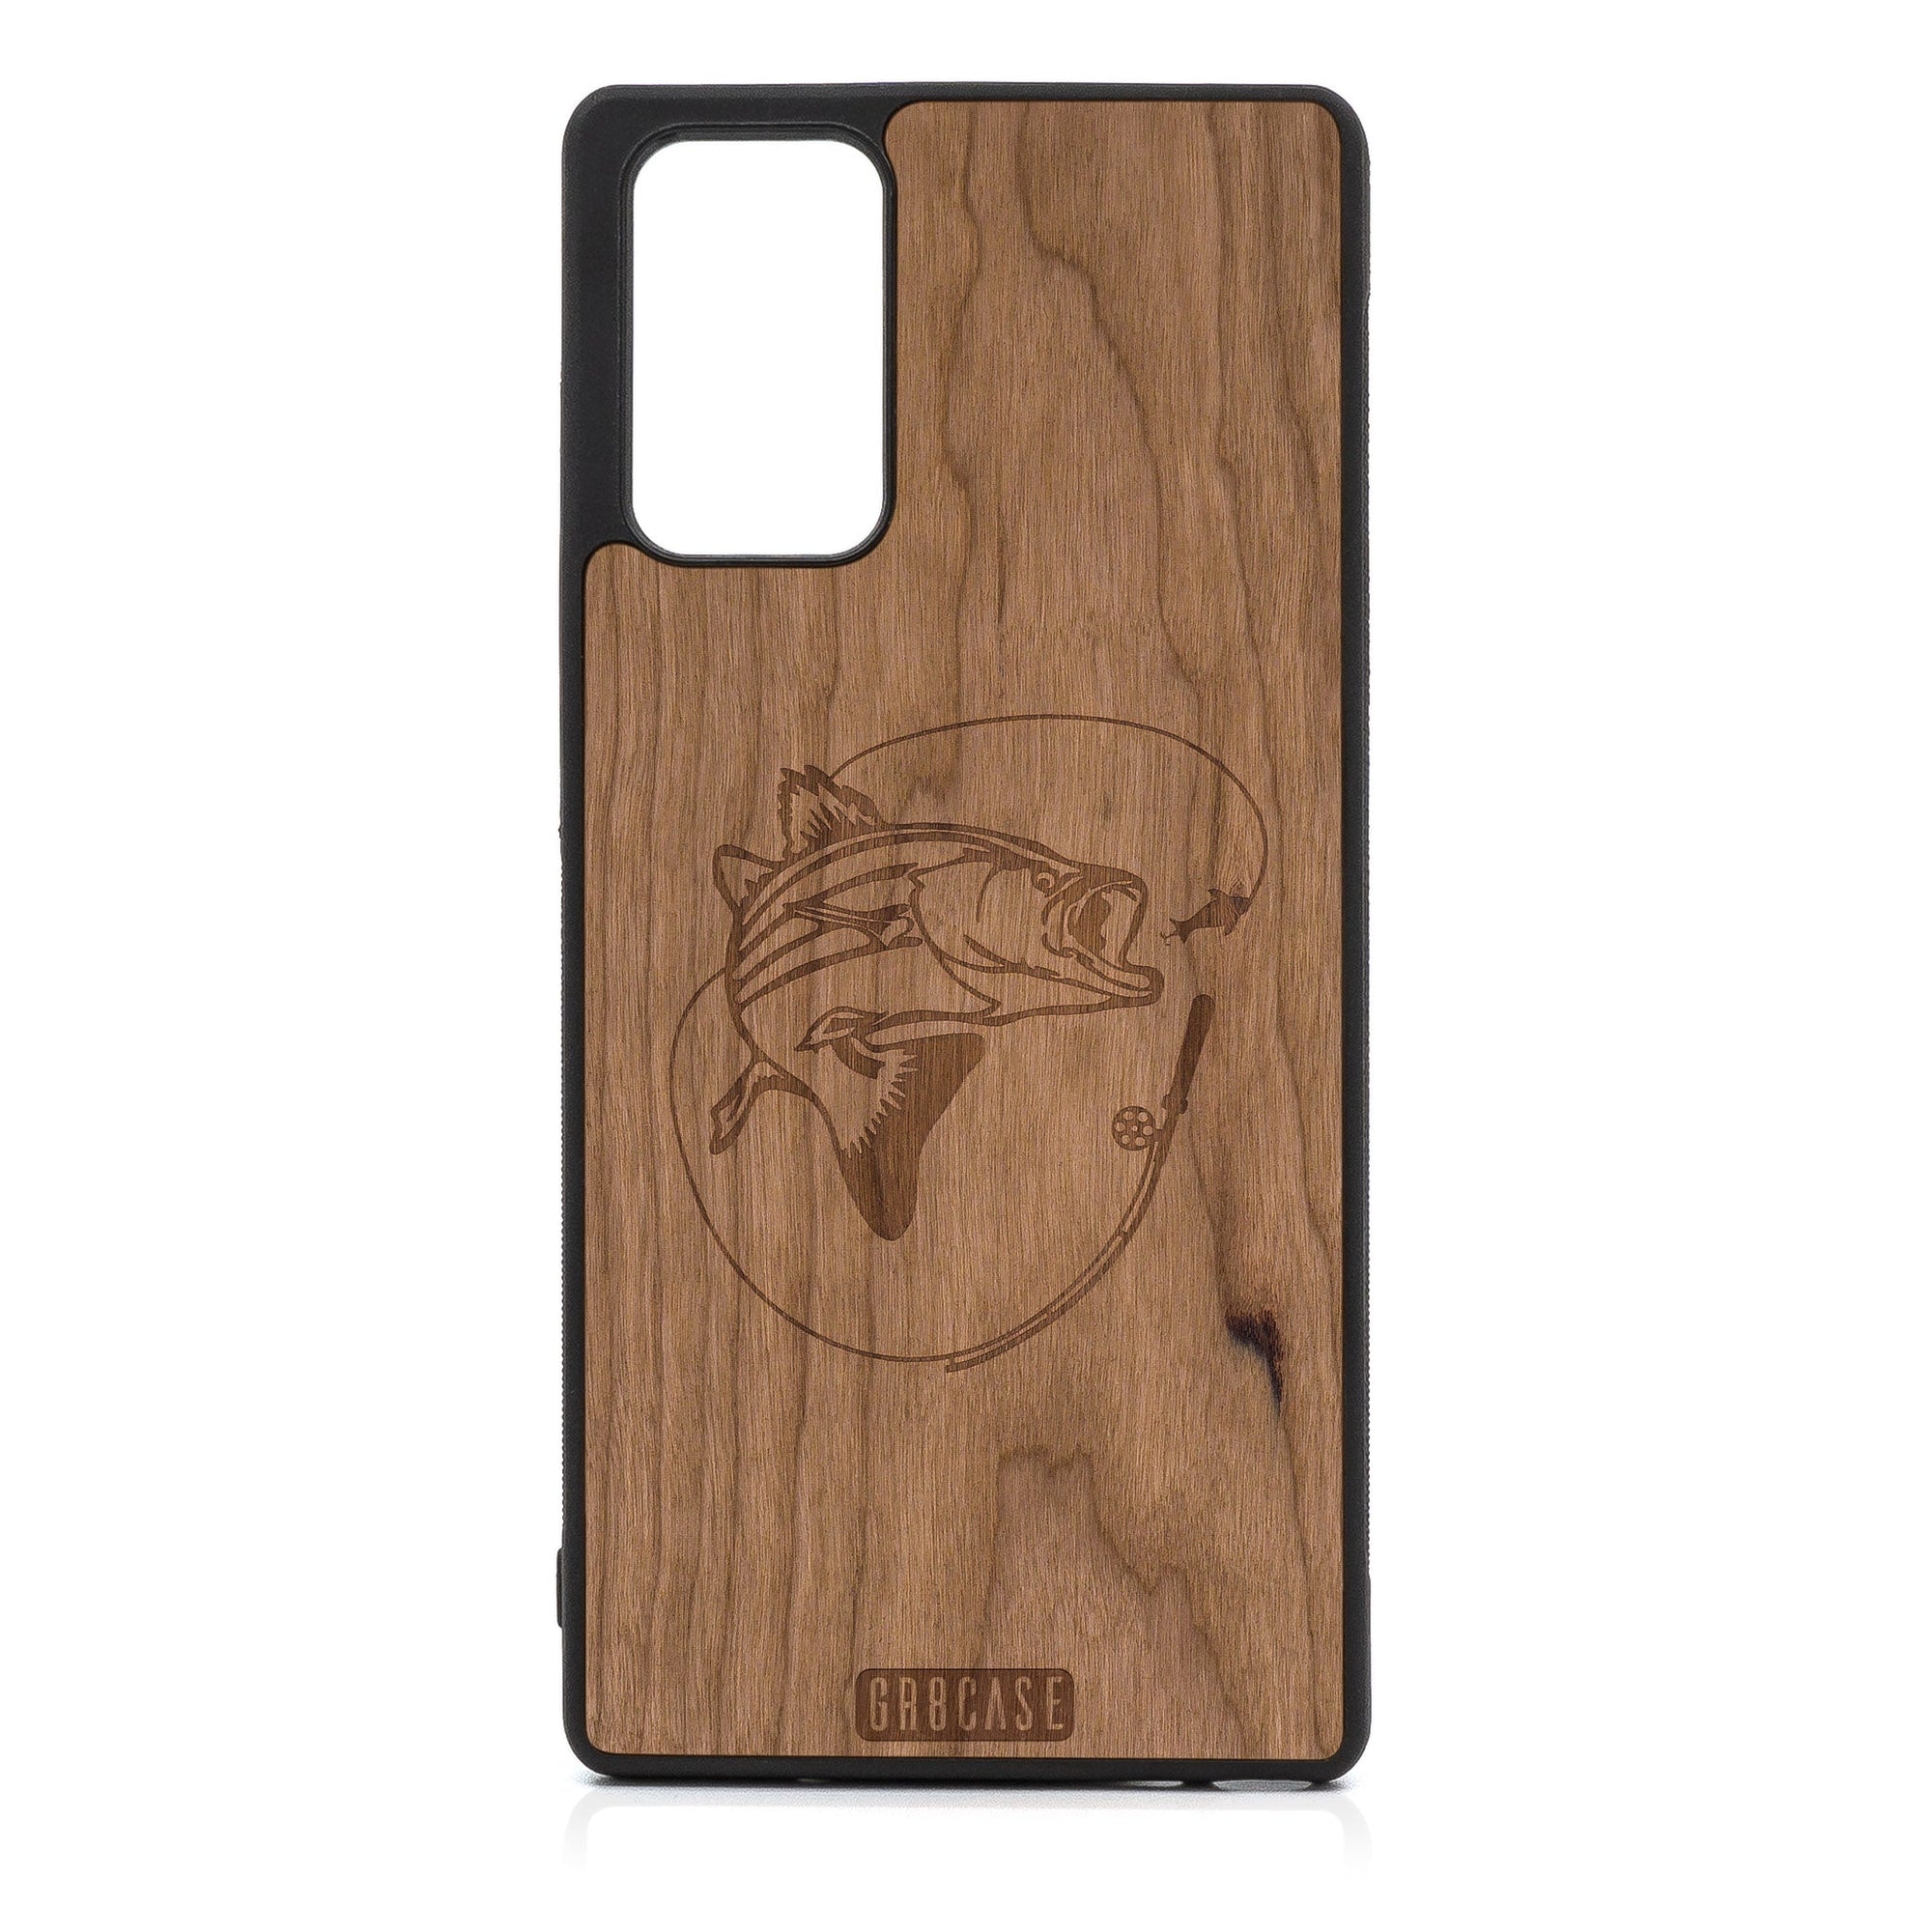 Fish and Reel Design Wood Case For Samsung Galaxy A52 5G